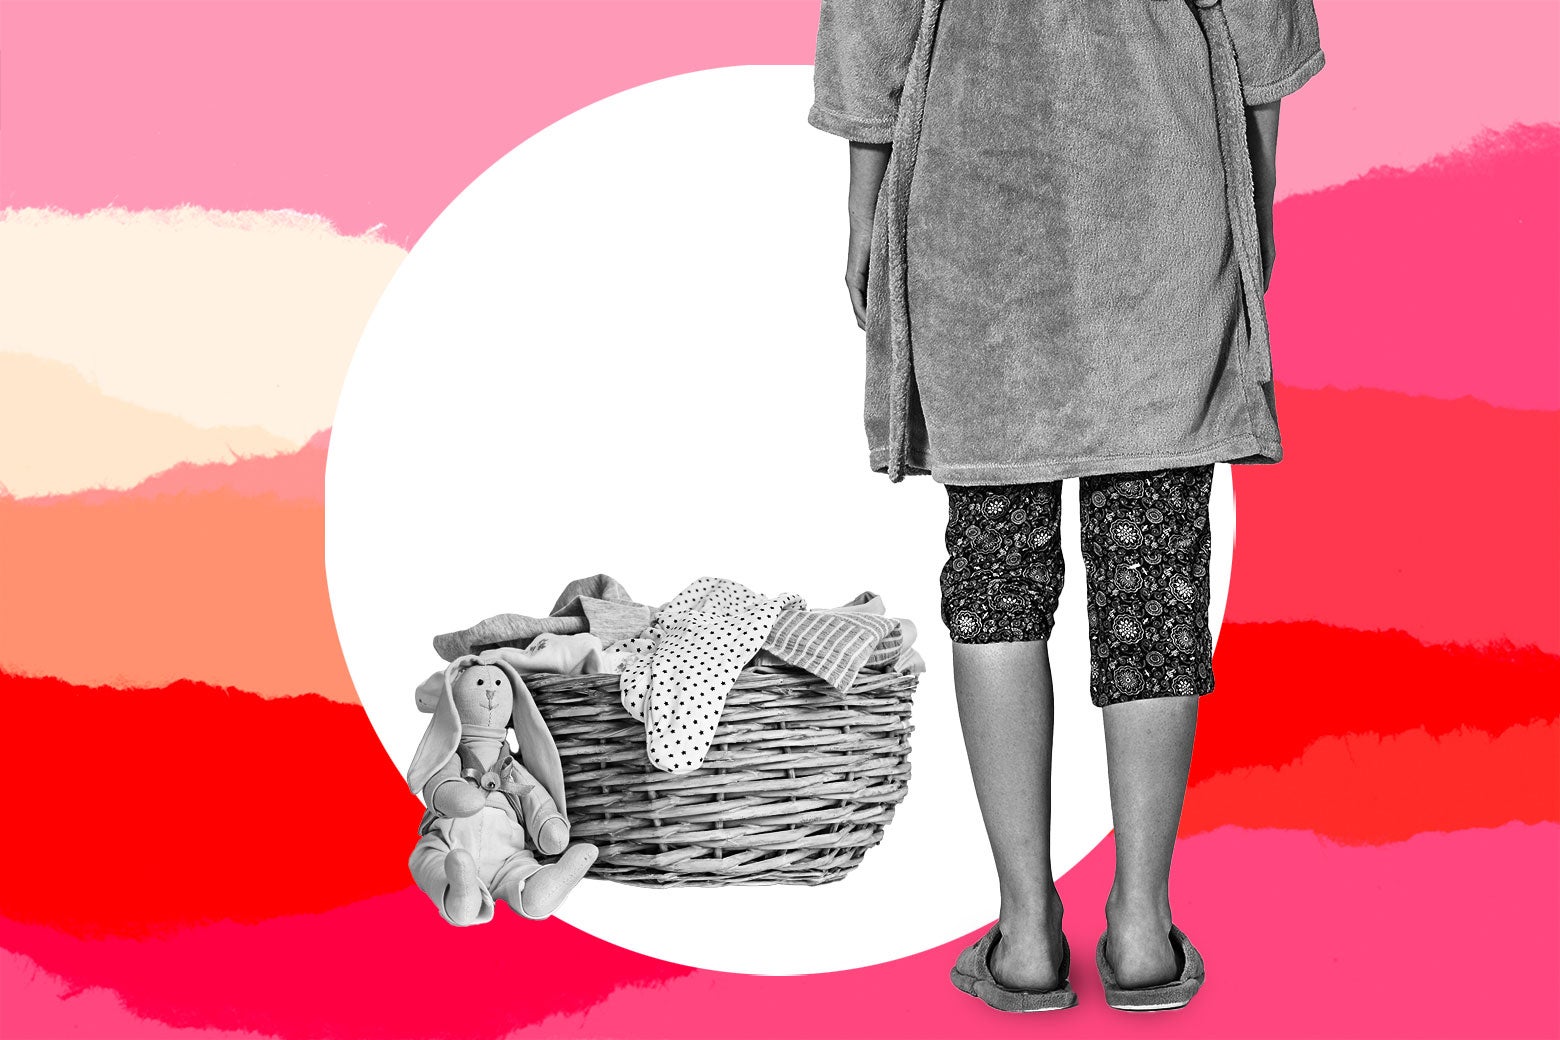 A woman stands in her slippers next to a basket of laundry.